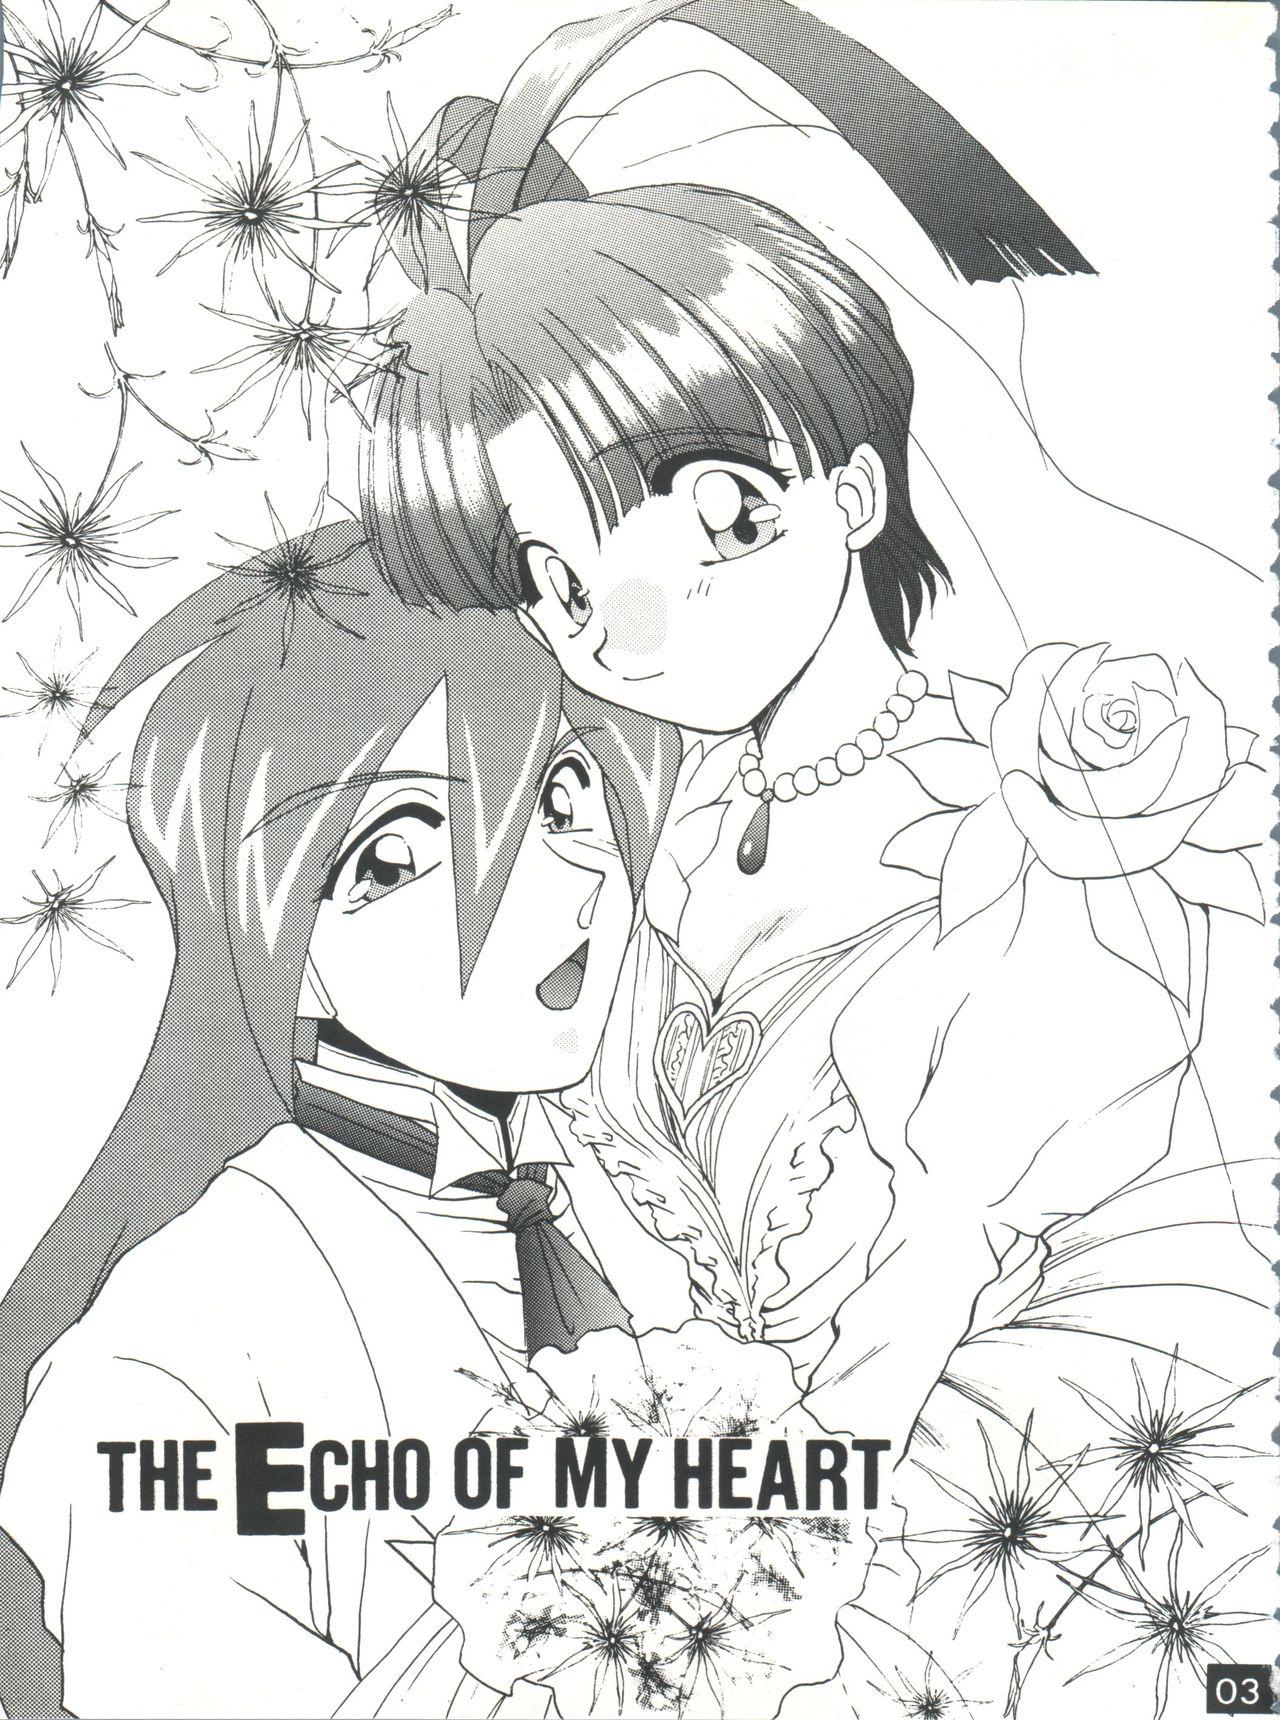 Maid The Echo of My Heart - Gaogaigar Coeds - Page 2